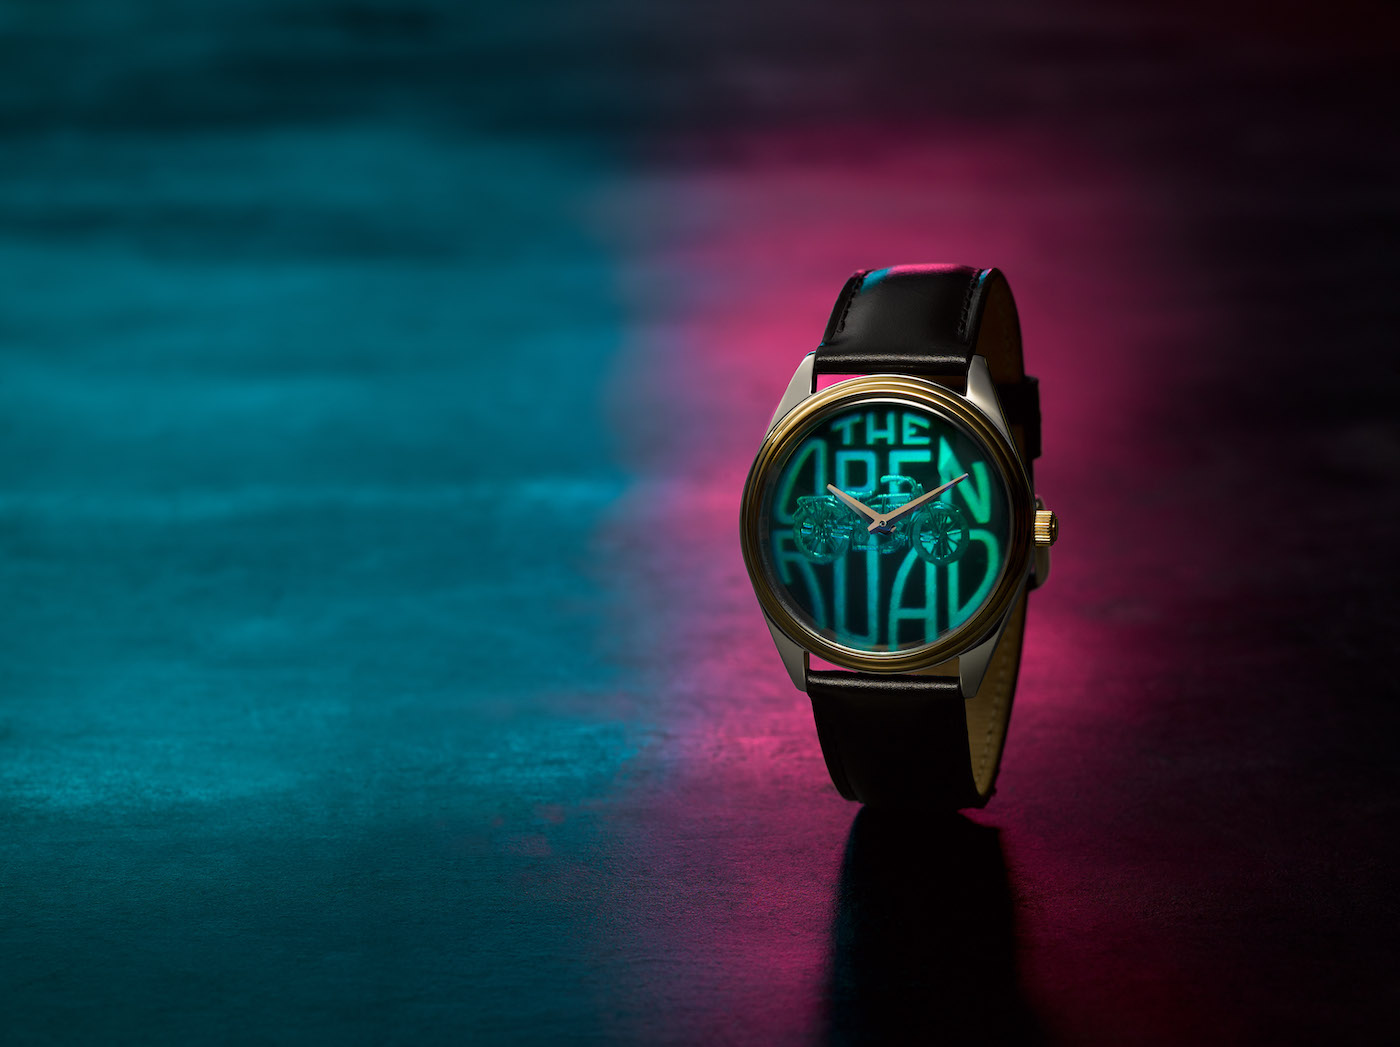 Fossil-The-Hologram-Watch